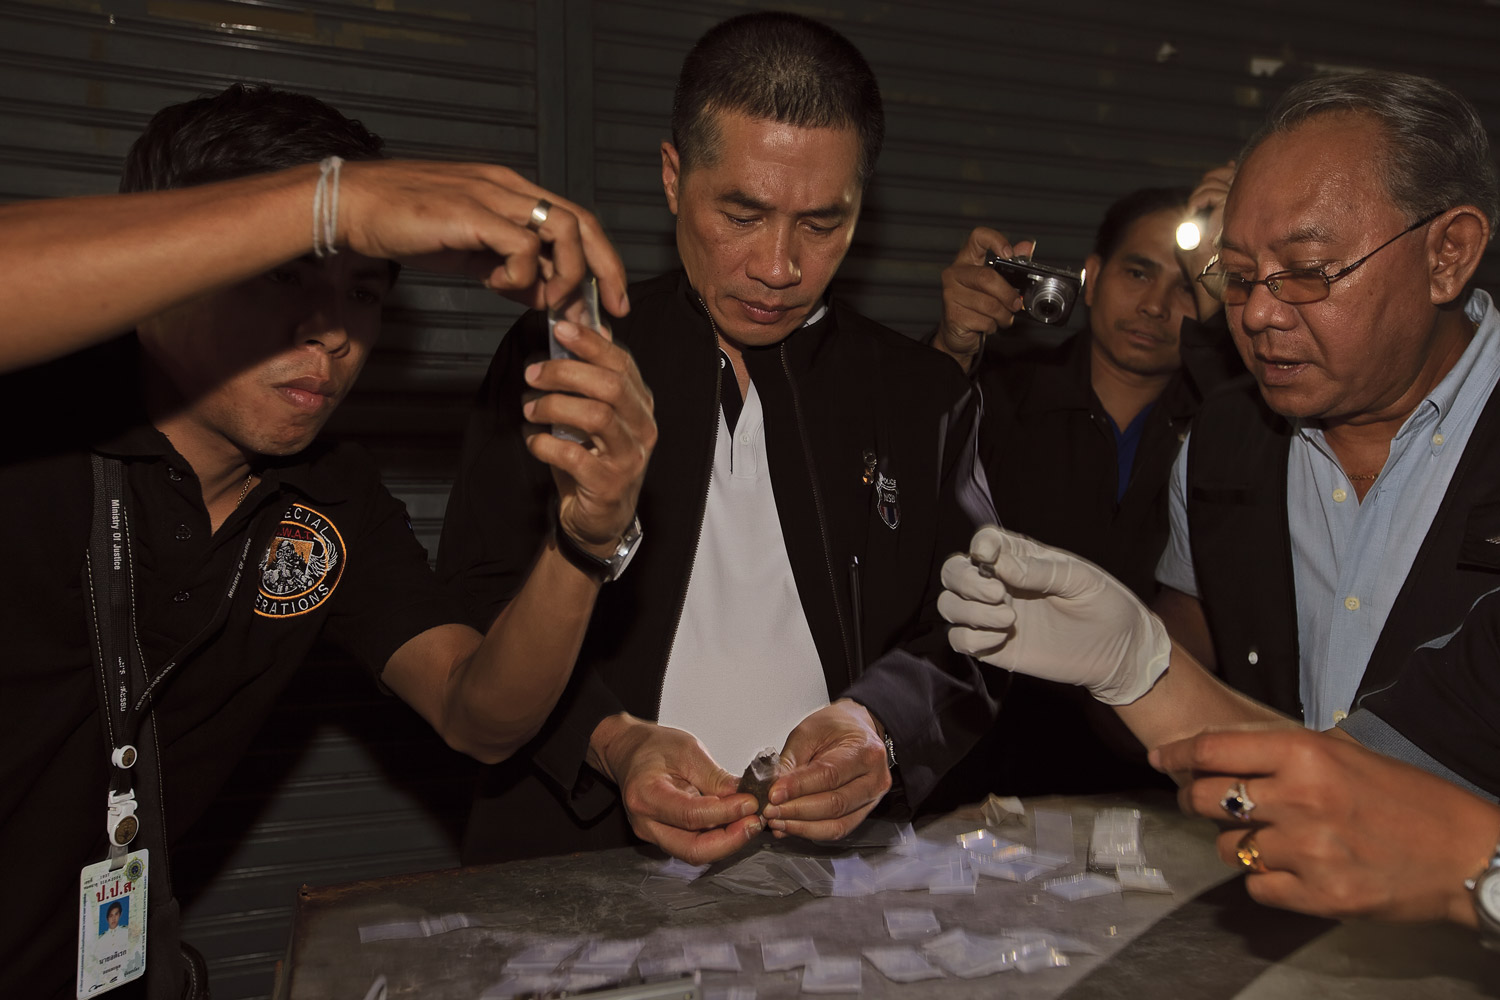 Police with Thailand’s Narcotics Suppression Bureau examine the haul after a drug bust in Bangkok.